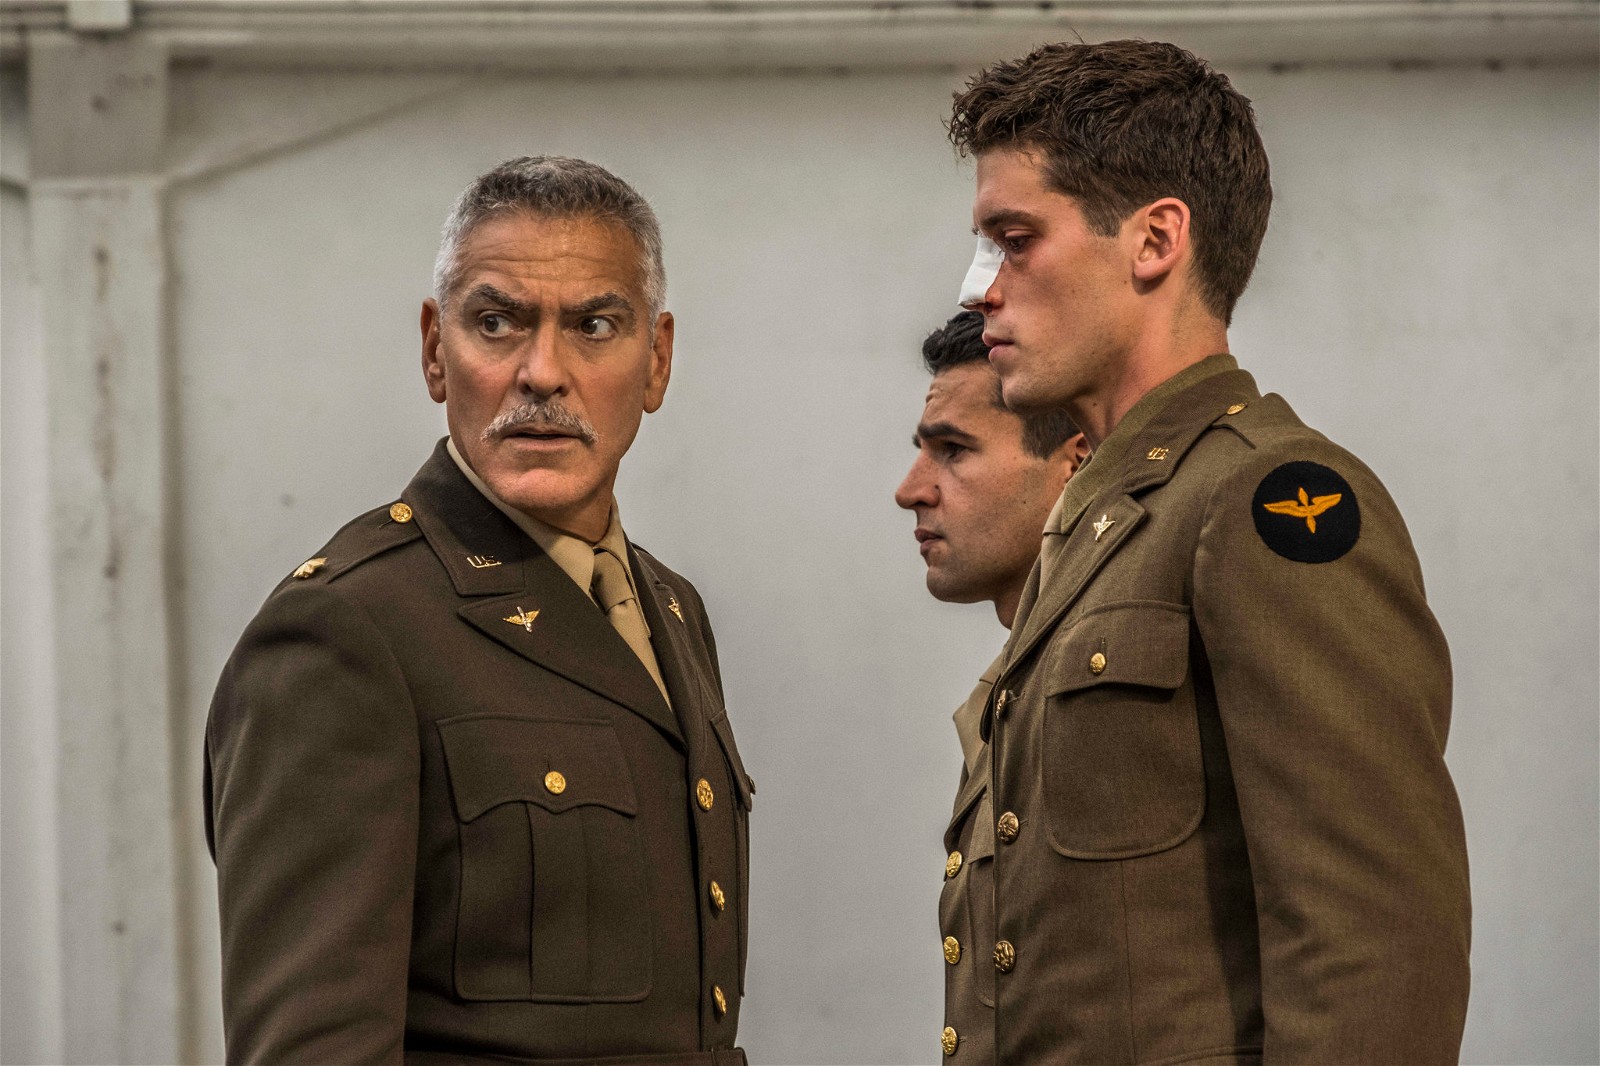 George Clooney was shooting Catch 22 when the accident happened